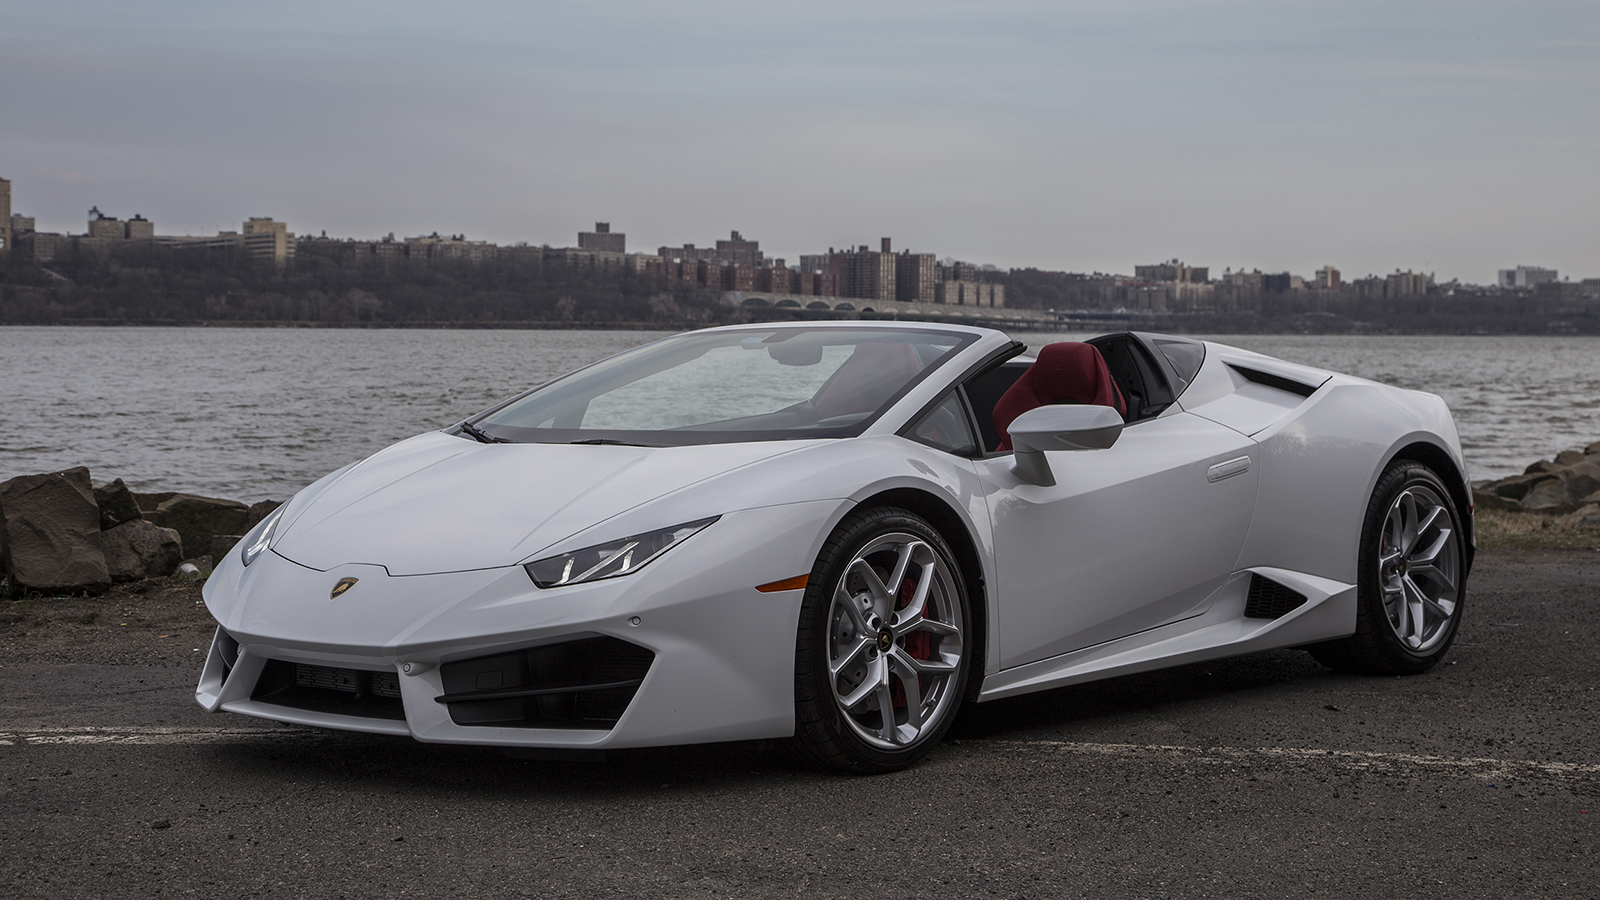 Image of a 2019 Lamborghini Huracan Spyder on a waterfront.